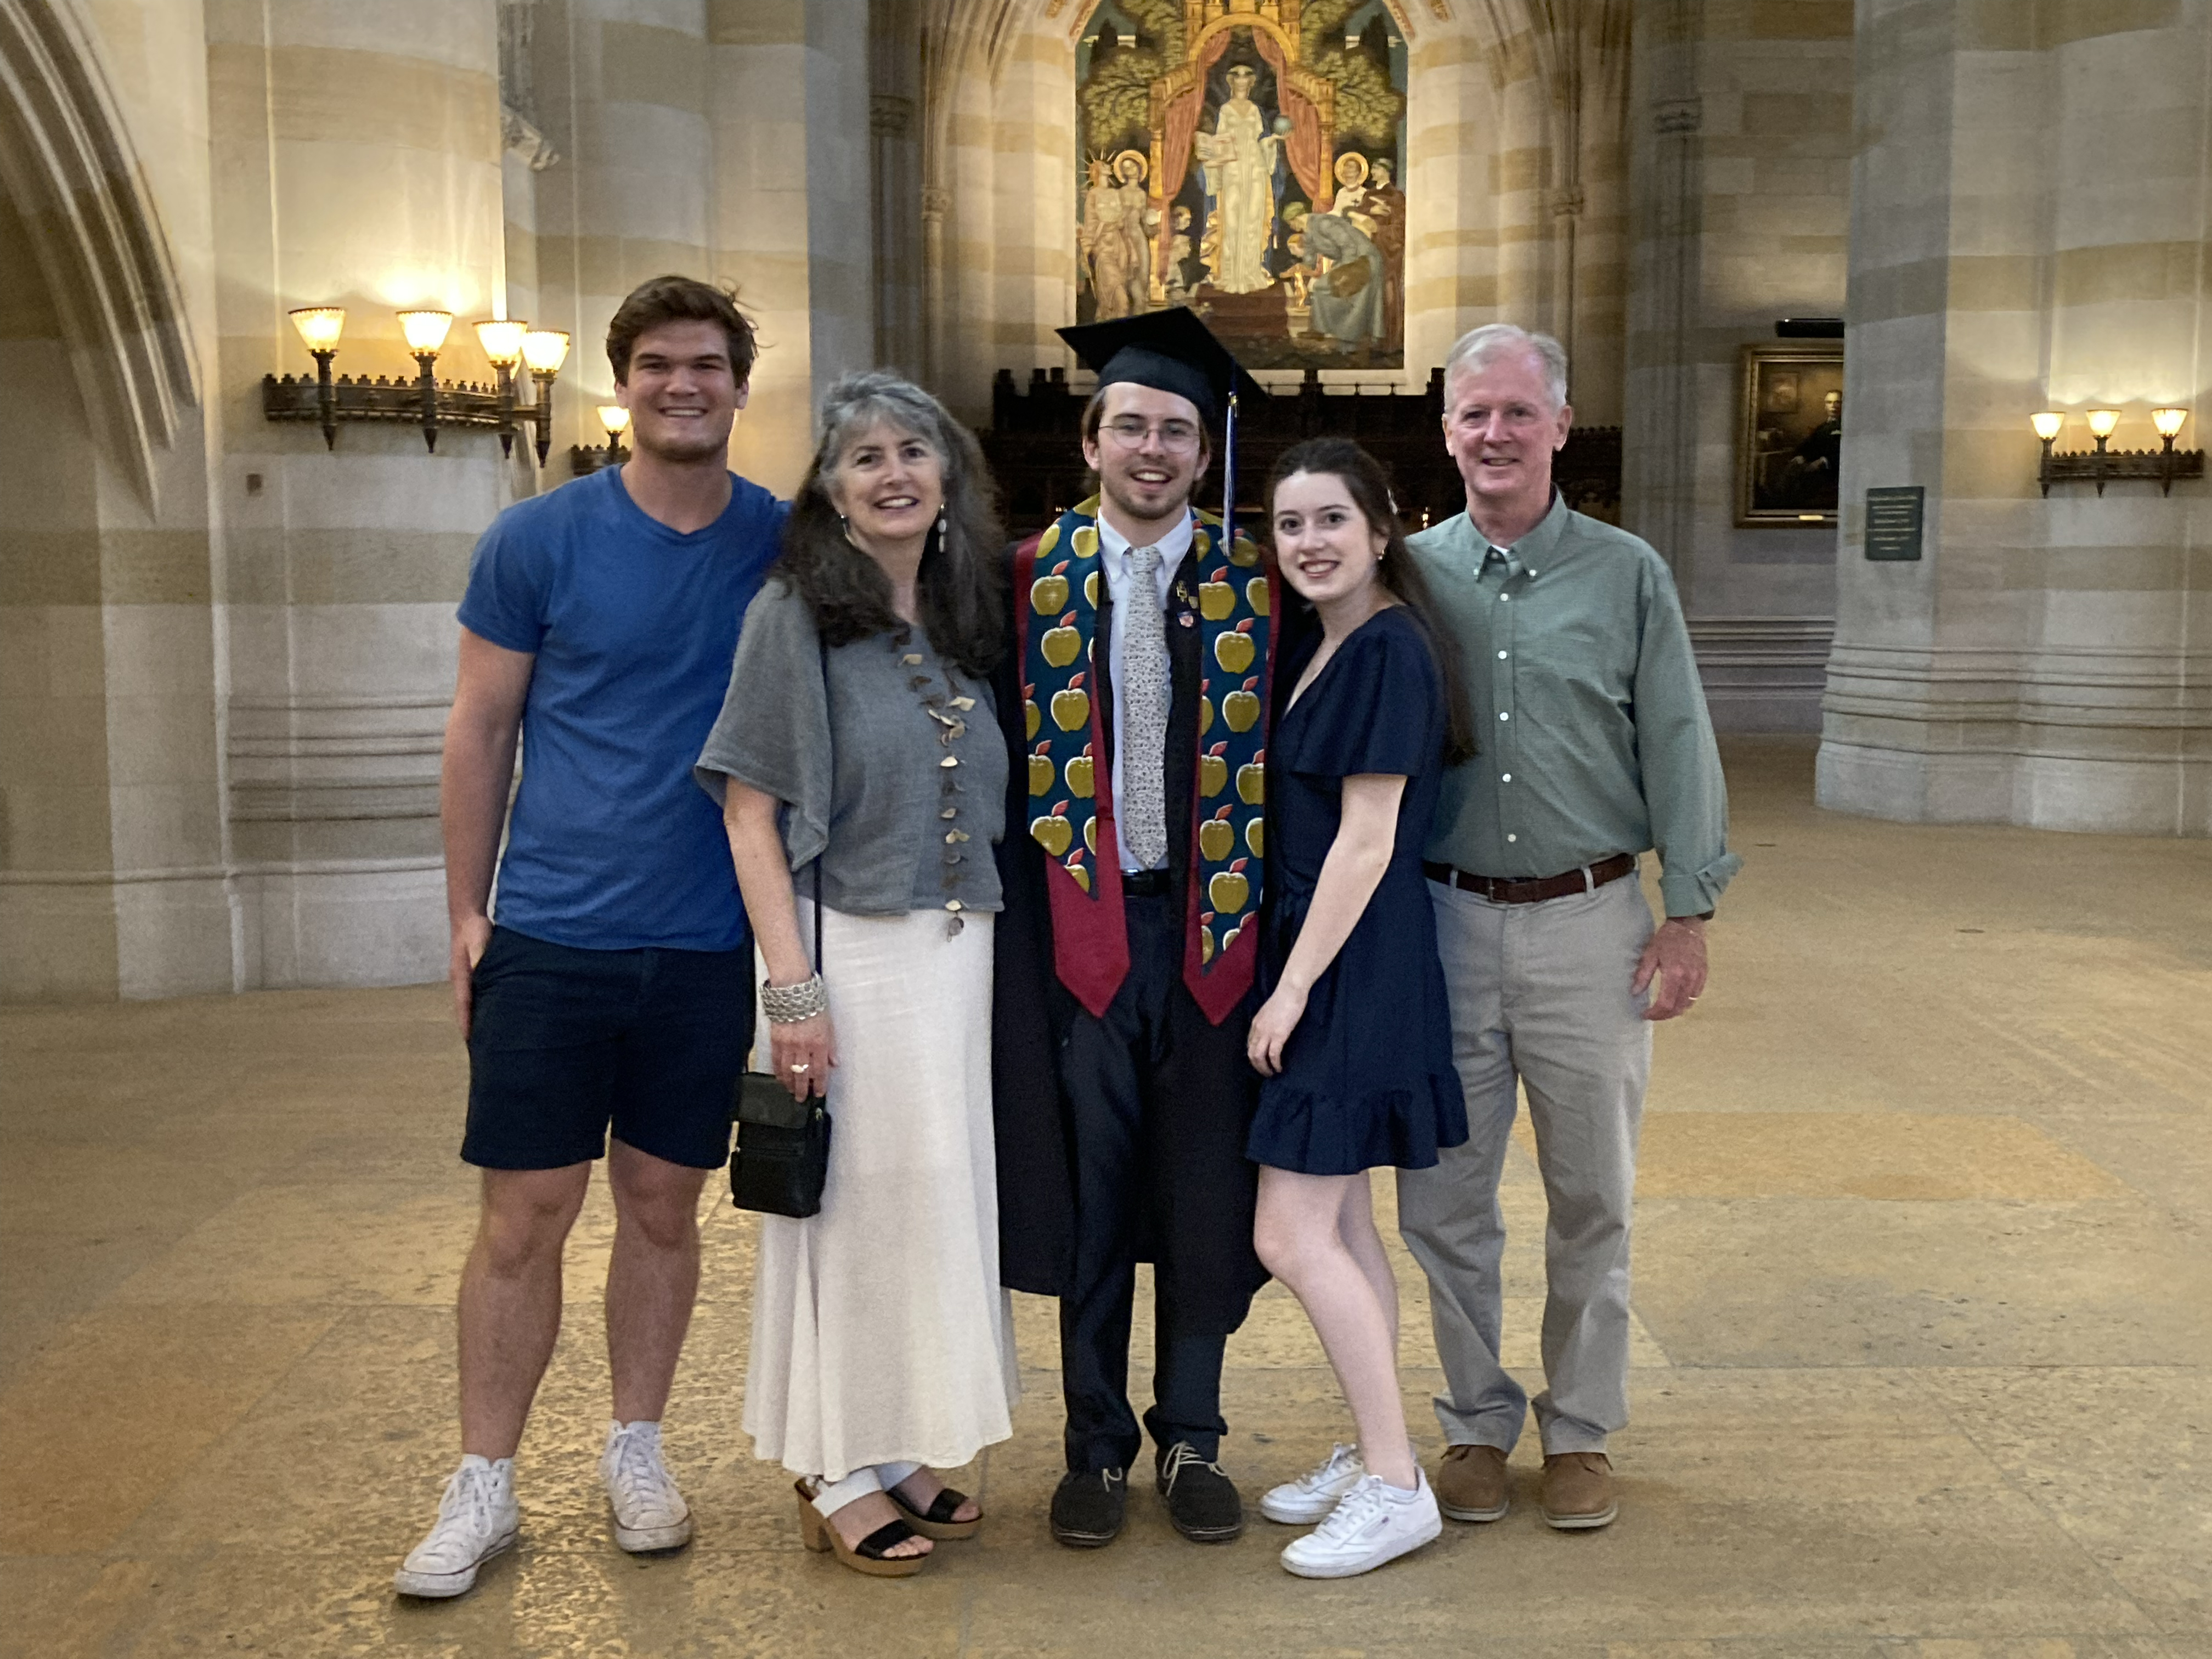 Family of five poses in front of the painting of Alma Mater in Sterling nave: The graduate, at center, wears a short beard and moustache and glasses and a stole embellished with gold apples. A young girl stands to his left, wearing a short blue dress, and an older man in green shirt and khakis stands next to her. To the graduate's right is a woman with long salt-and-pepper hair wearing a gray top and long white skirt; at the end is a tall young man in blue tee shirt and shorts. 